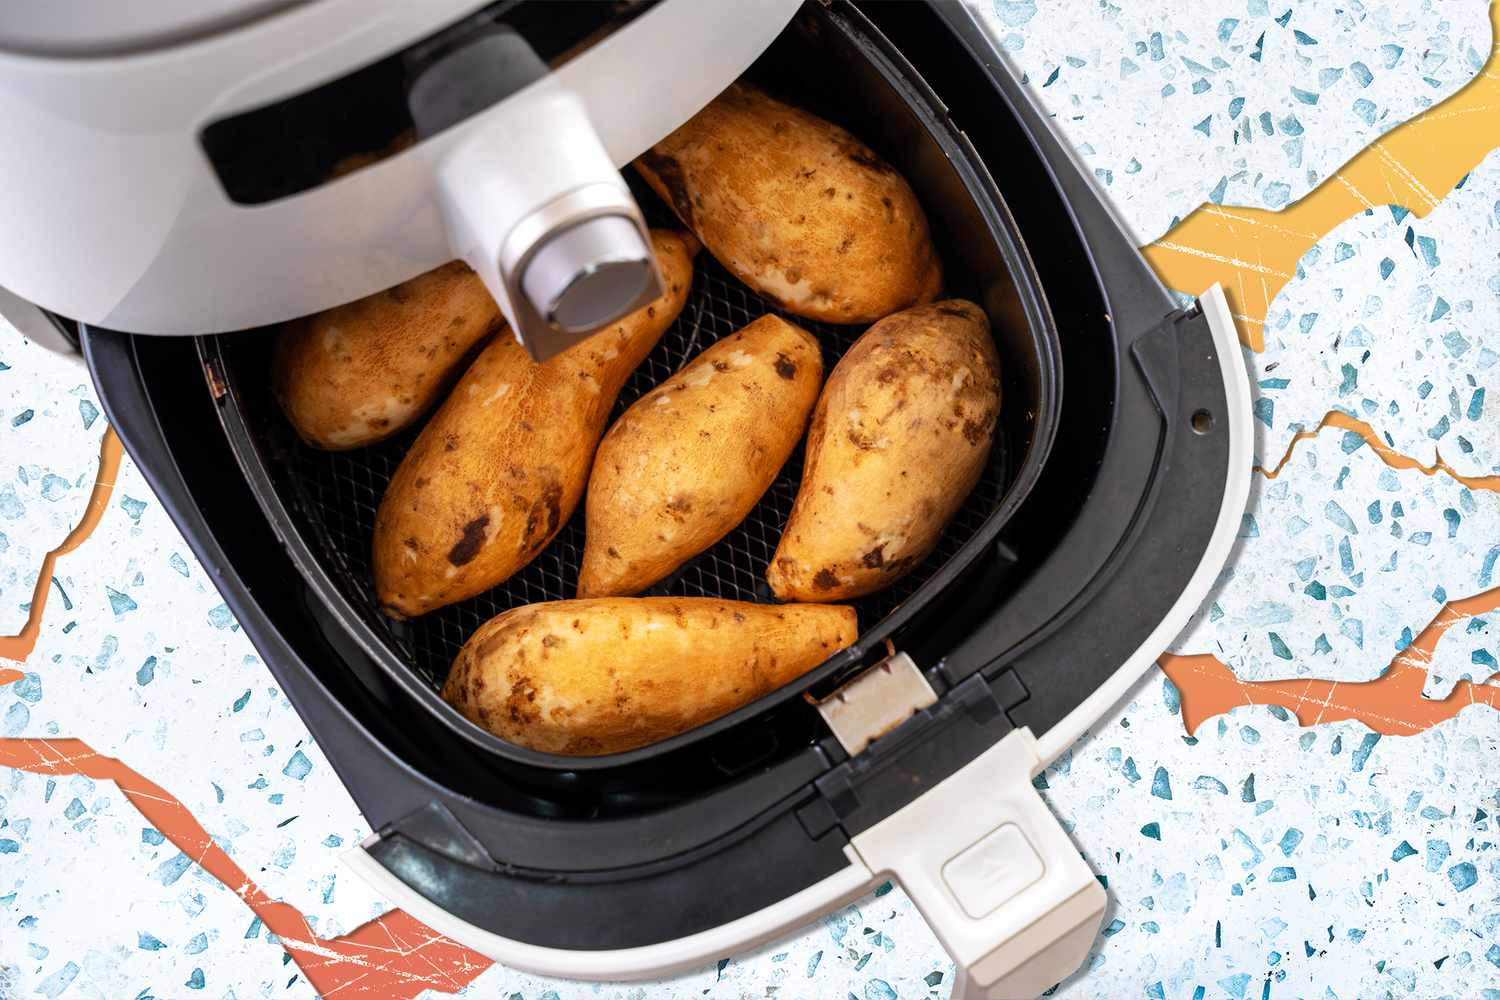 Air fryer on a cracked countertop